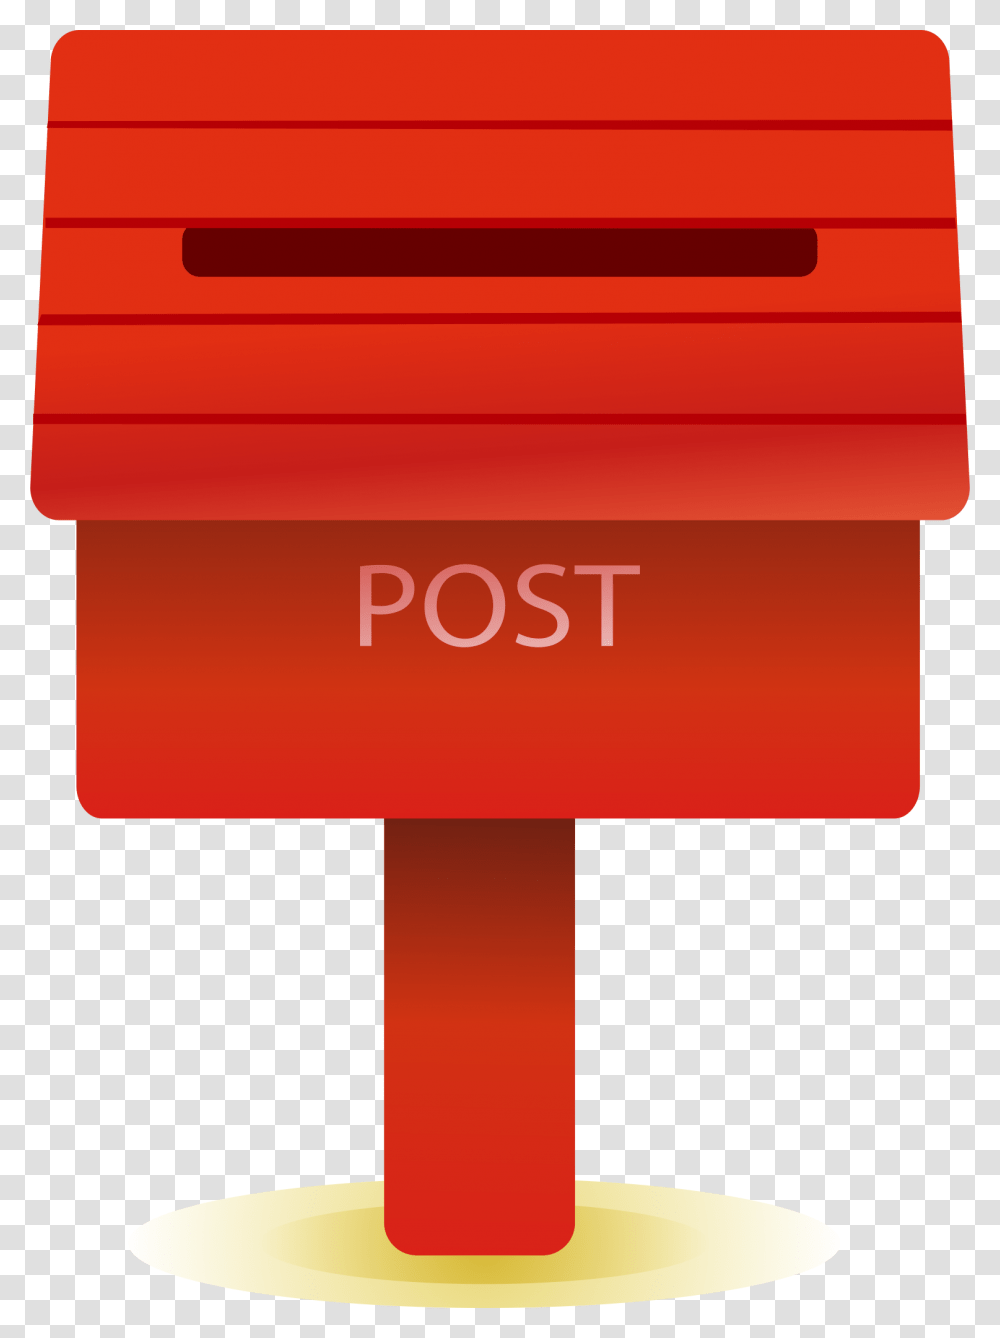 Mail Drawing Red Post Box Cartoon Mailbox, Letterbox, Postbox, Public Mailbox Transparent Png